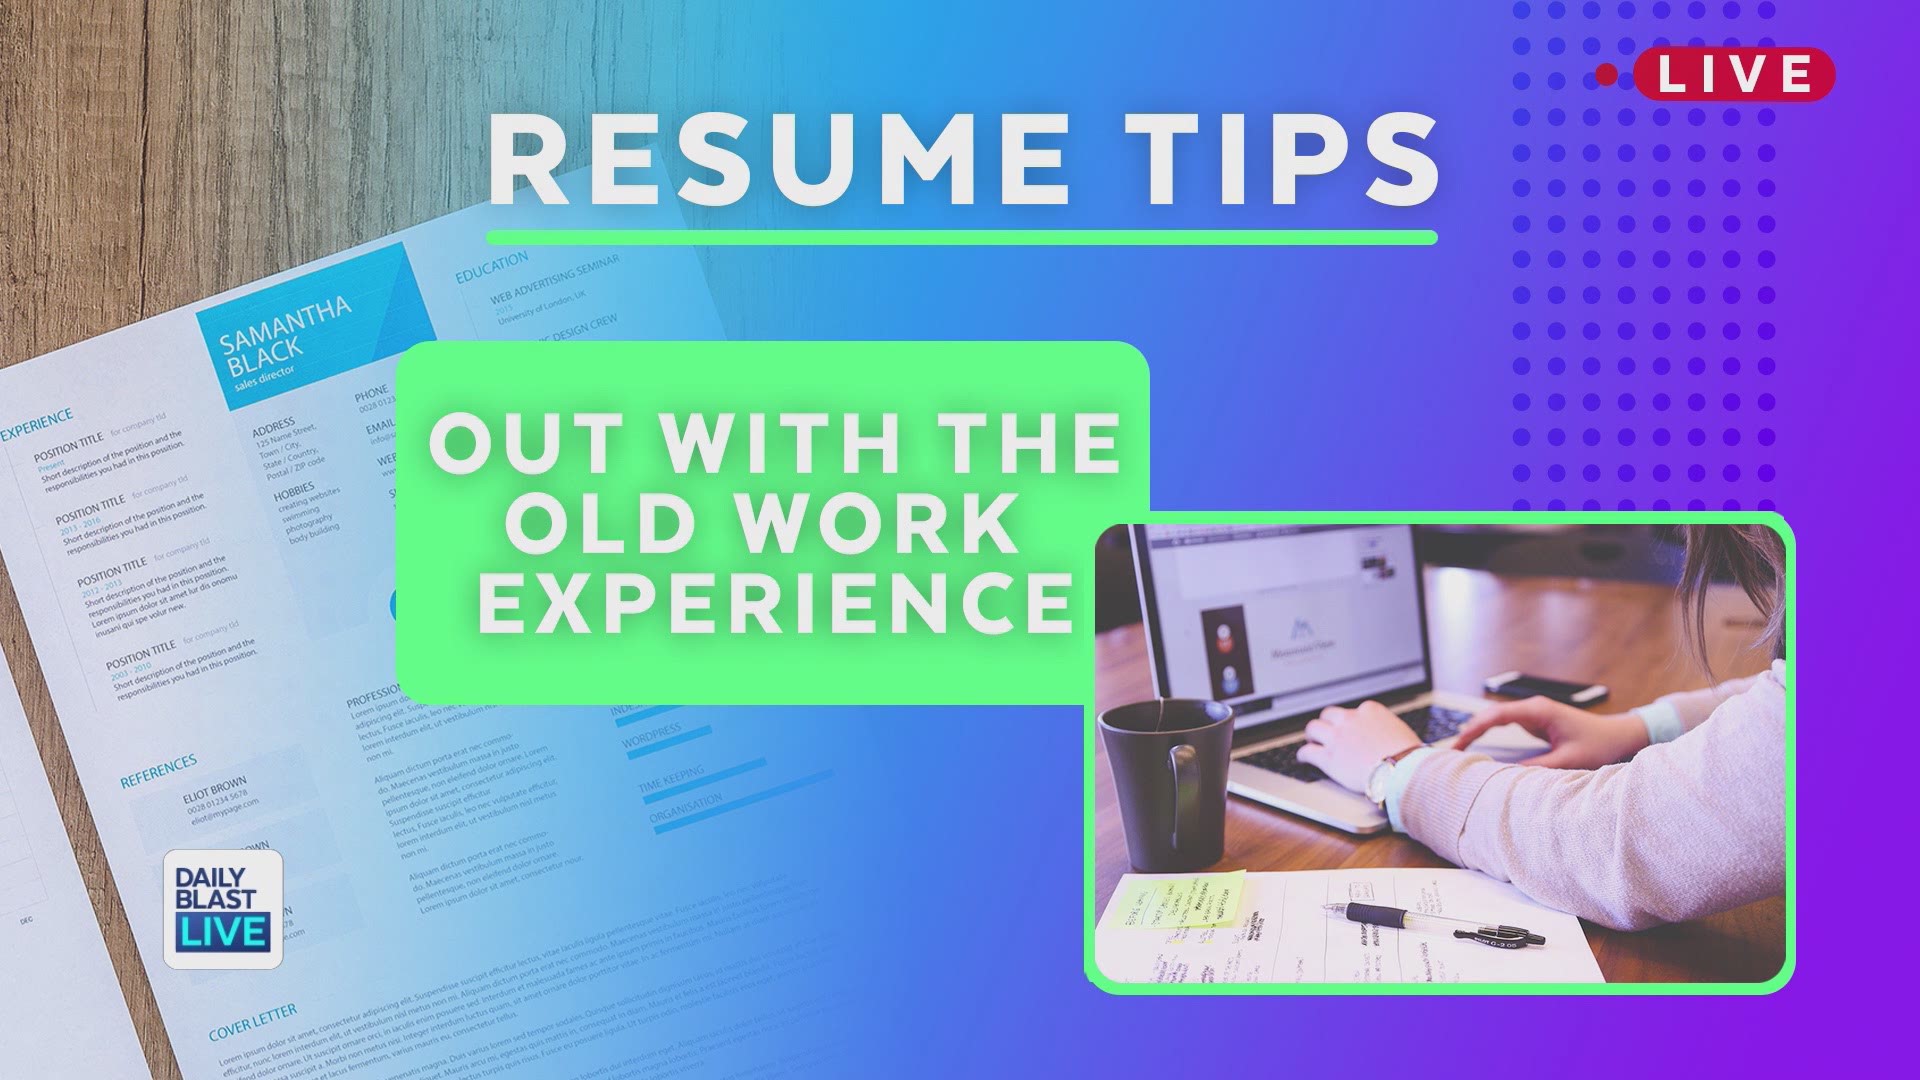 Applying for a job can be hard- don't make it harder by having a bad resume. Daily Blast LIVE has compiled a list from several experts to help you make that resume sleek, relevant, and most importantly- land you that dream job! From choosing the perfect f